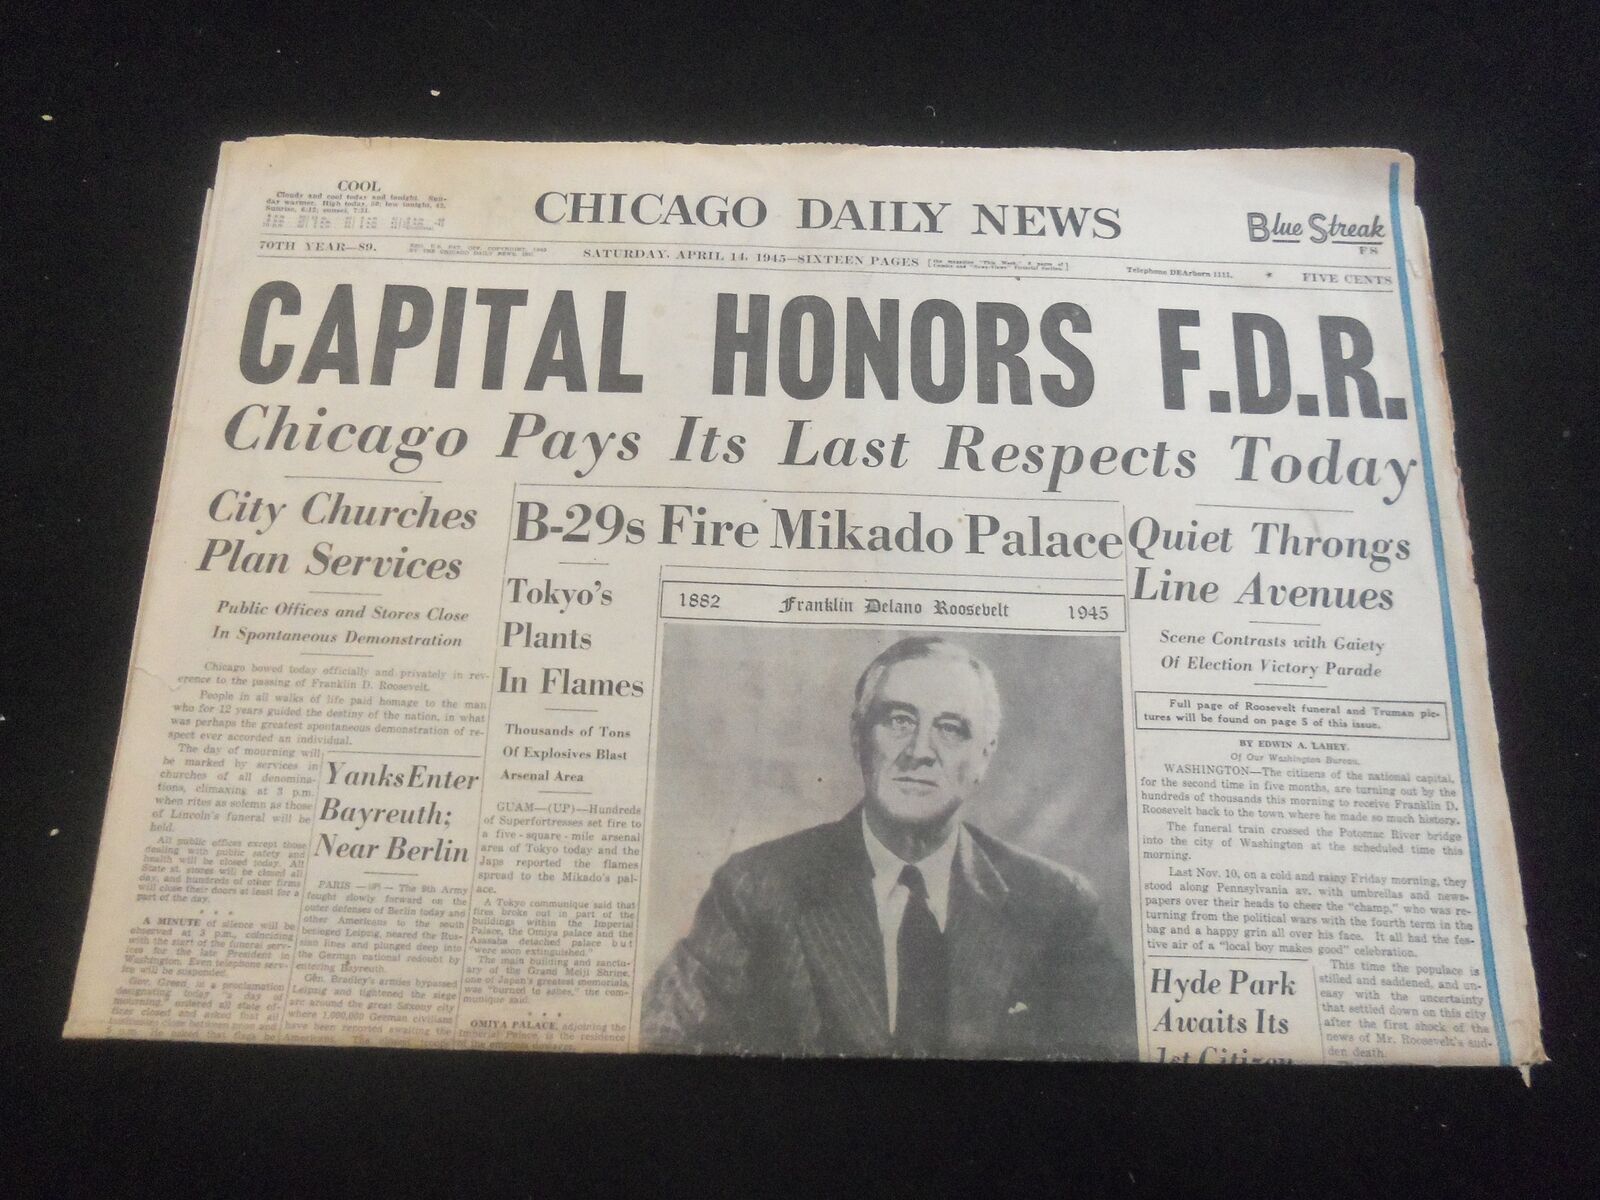 1945 APRIL 14 CHICAGO DAILY NEWS NEWSPAPER - CAPITAL HONORS F.D.R. - NP 5791